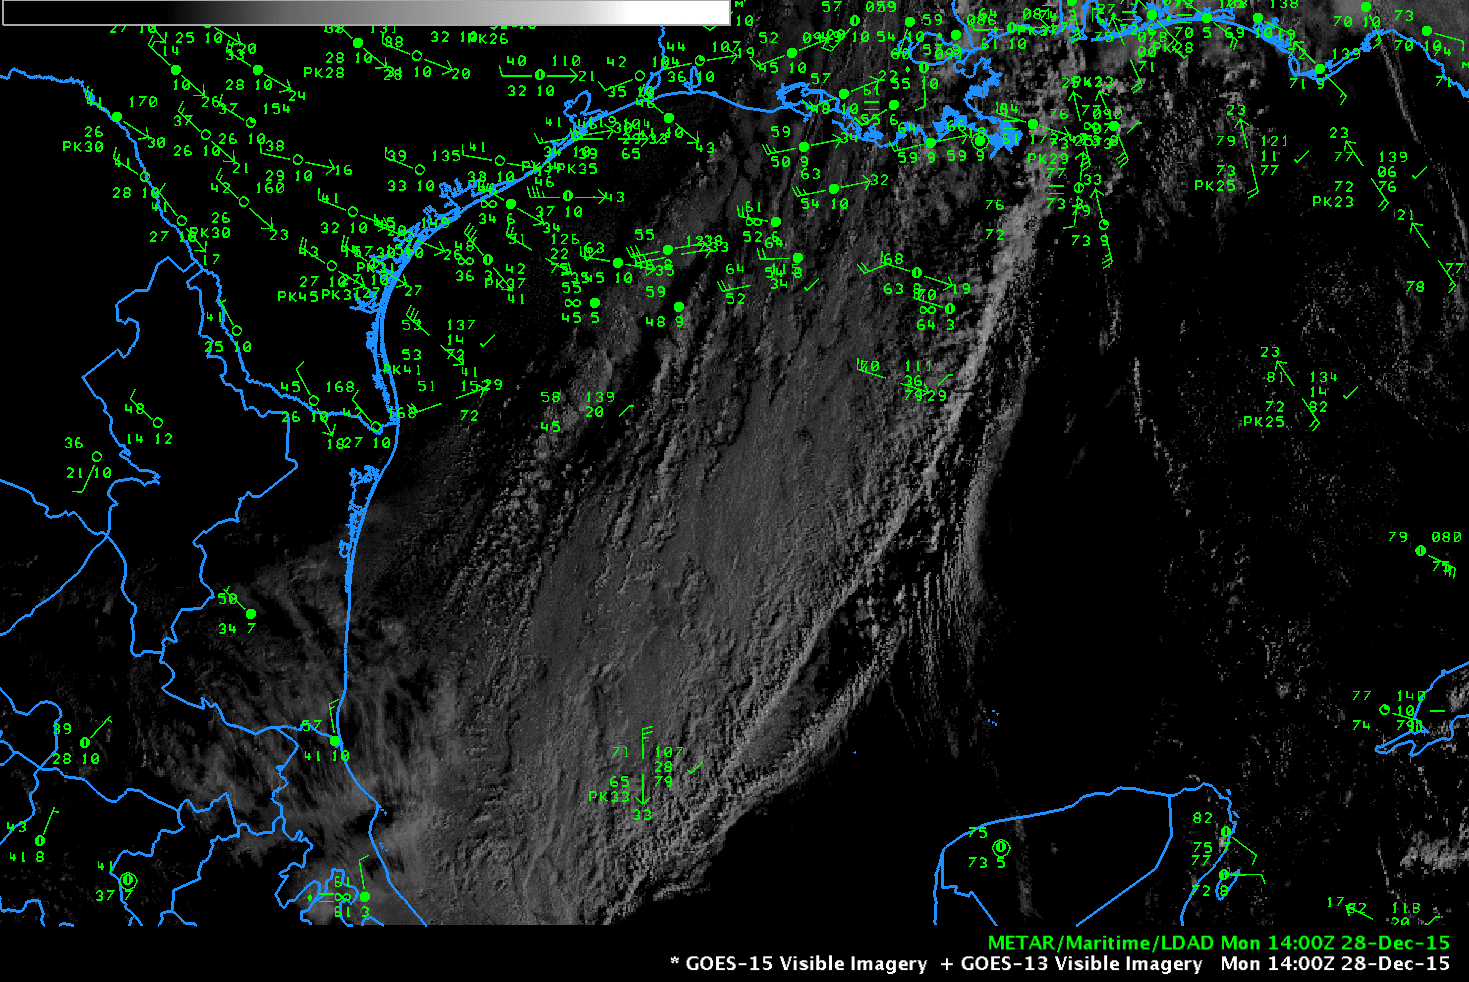 GOES-13 Visible Imagery (0.63 µm) and surface reports [click to enlarge]